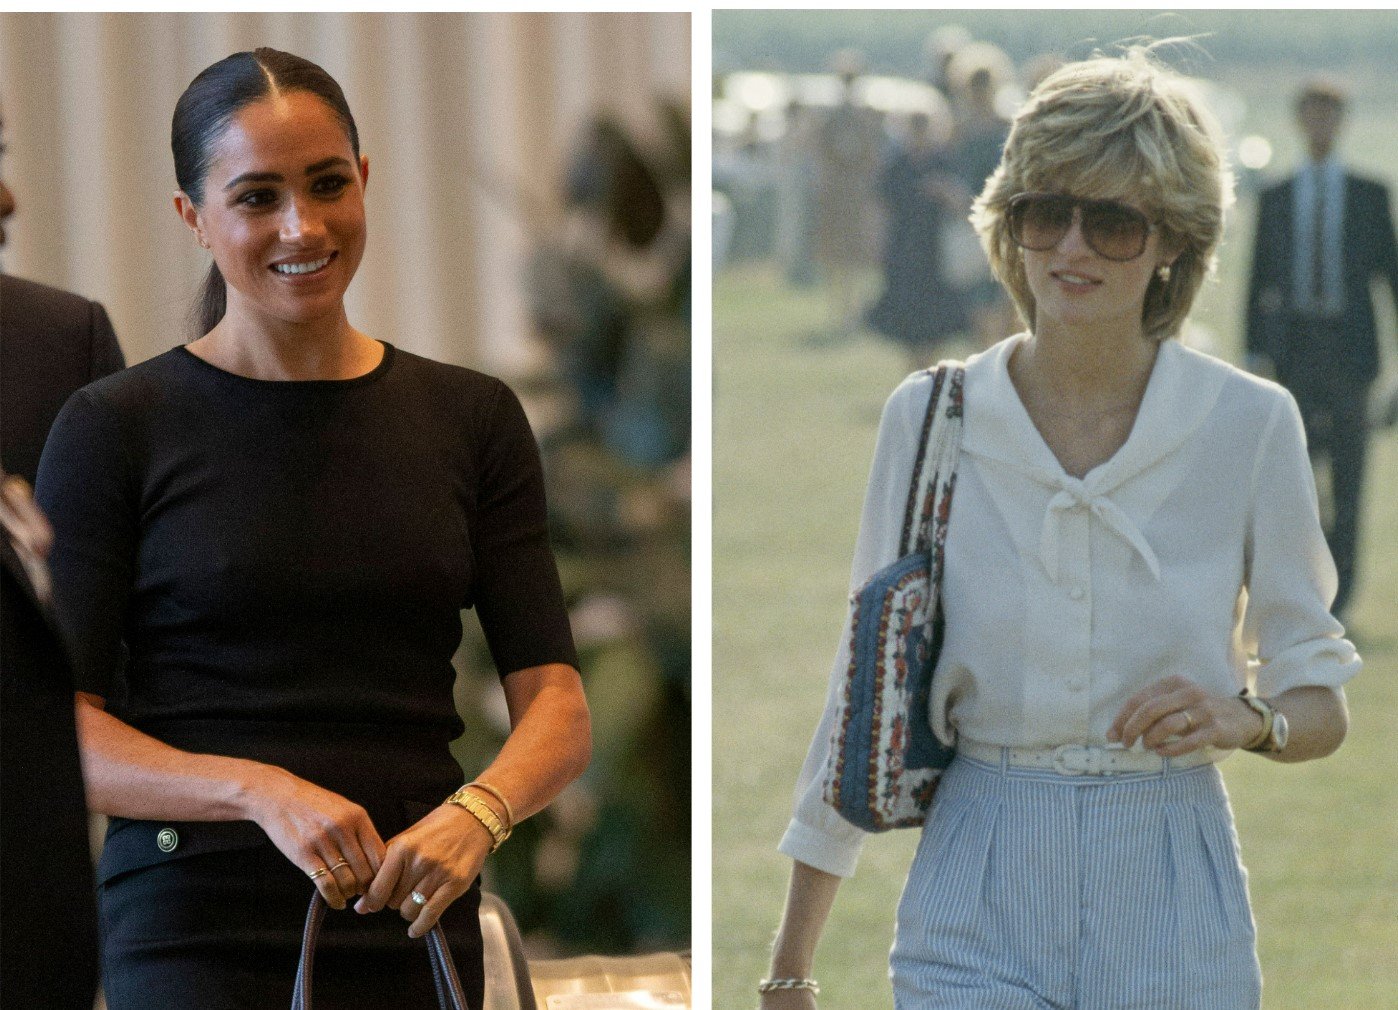 (L) Meghan Markle, who reportedly insisted Harry compare her to his mother, arrives to attend the Nelson Mandela Prize award ceremony, (R) Princess Diana attends a polo match at Cowdray Park Polo Club in West Sussex